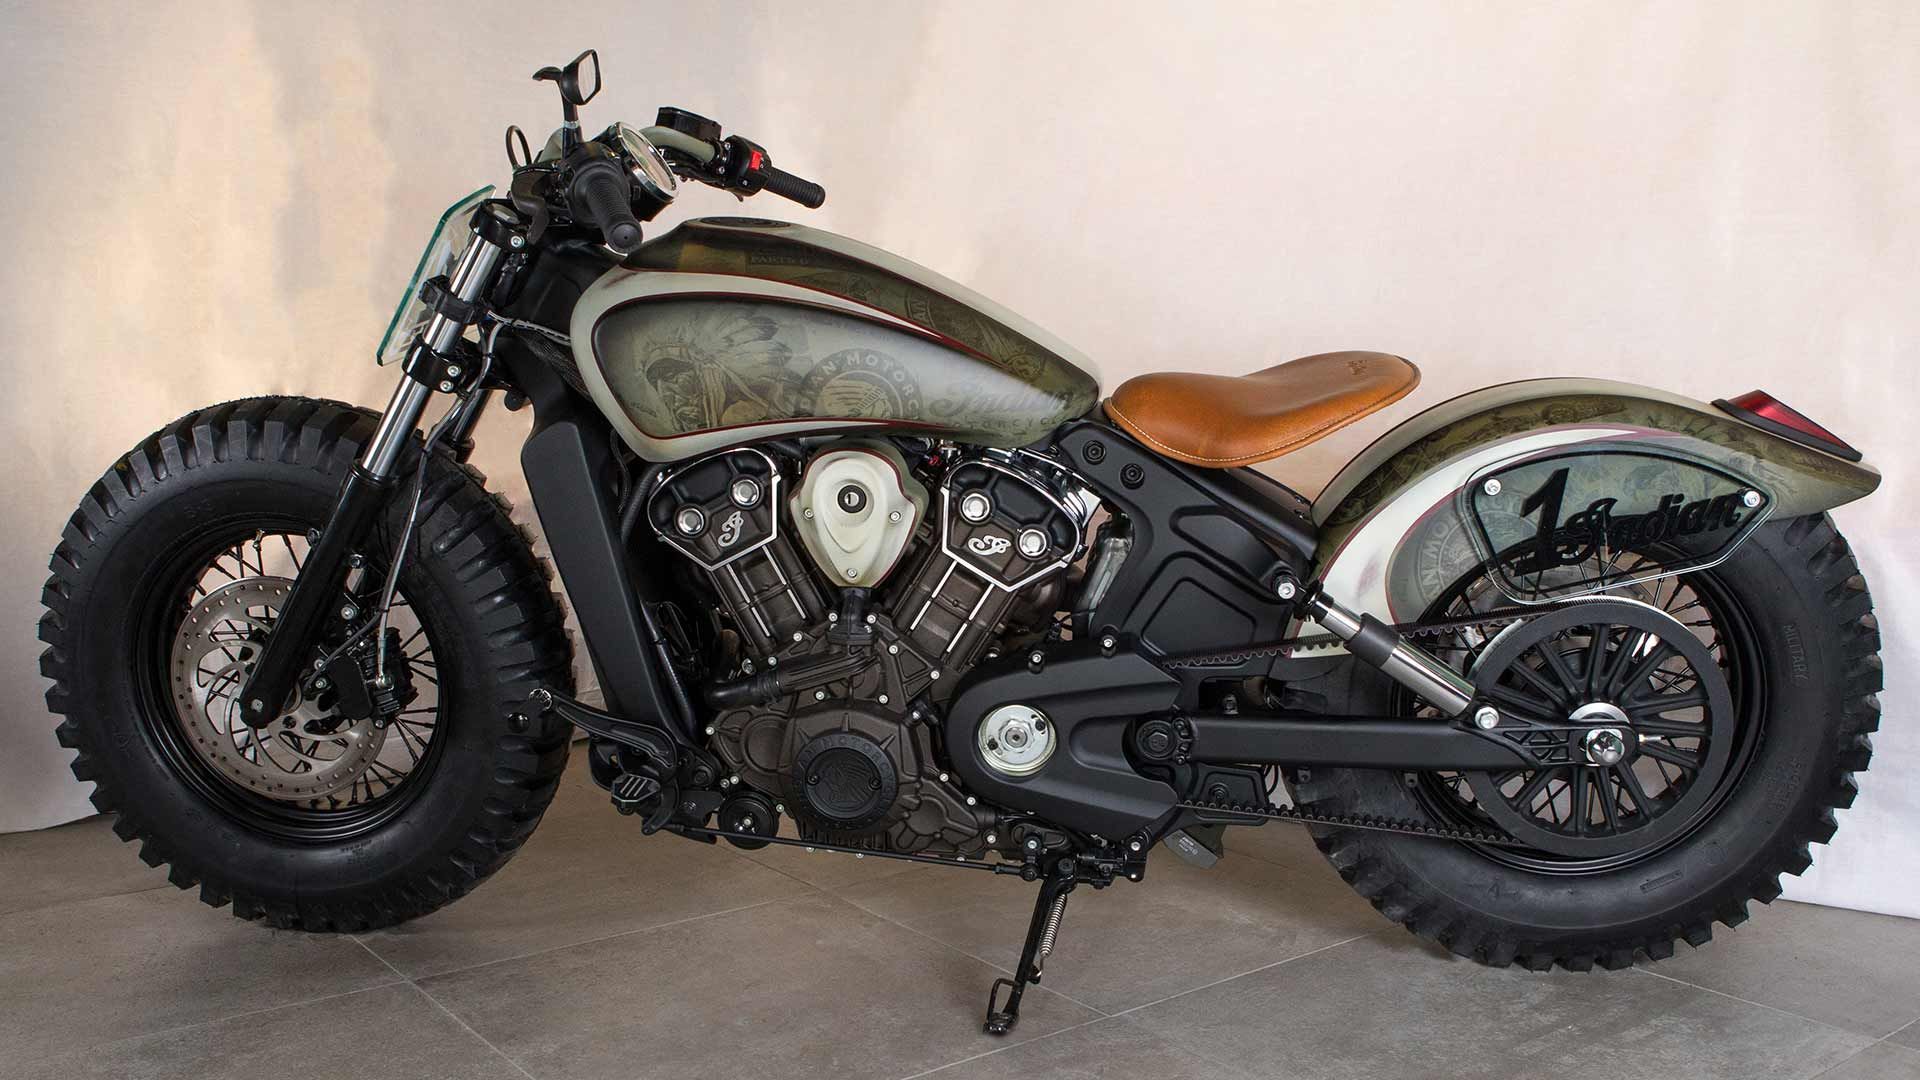 Custom Indian Motorcycle with subtle graphics